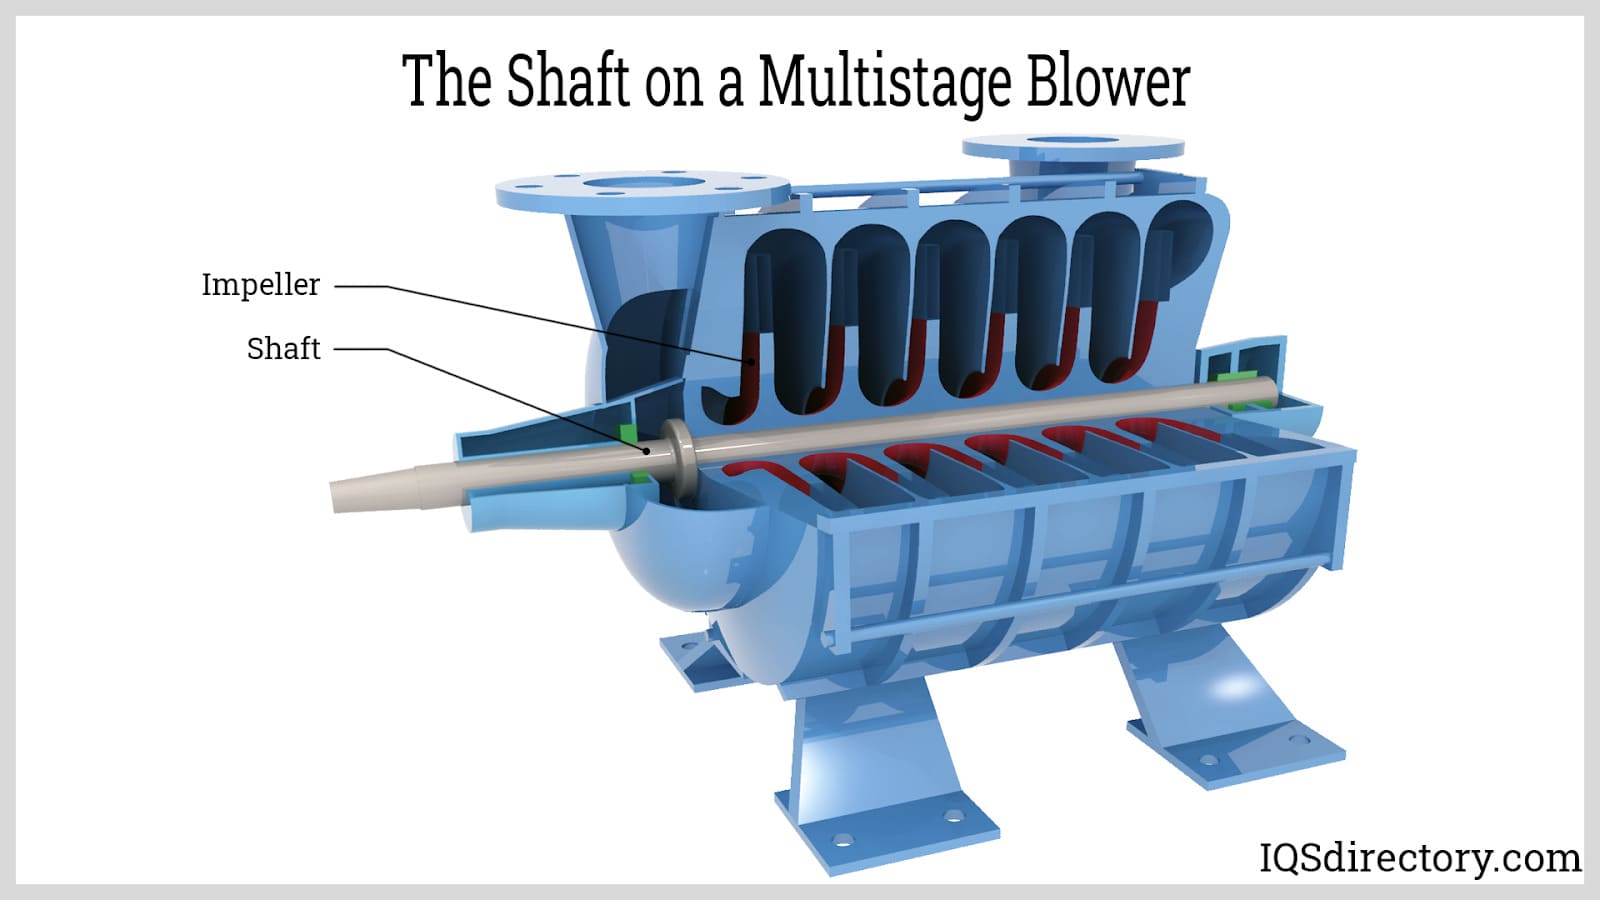 The Shaft on a Multistage Blower